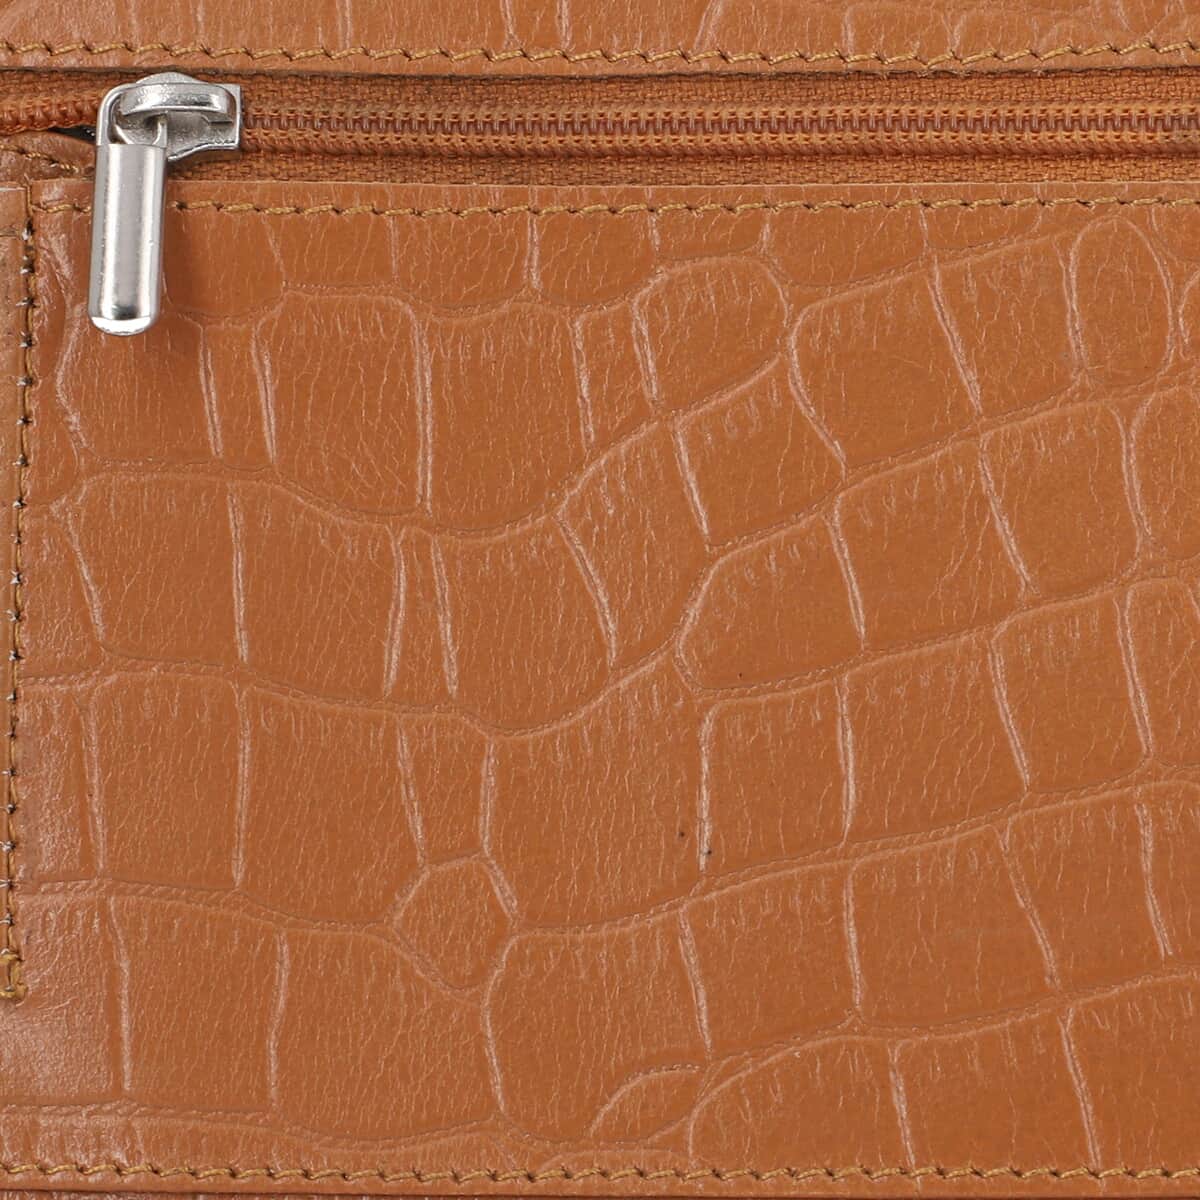 Union Code Tan Crocodile Embossed Pattern RFID Protected Genuine Leather Wallet for Women | Leather Purse | Card Holder | Designer Wallet image number 5